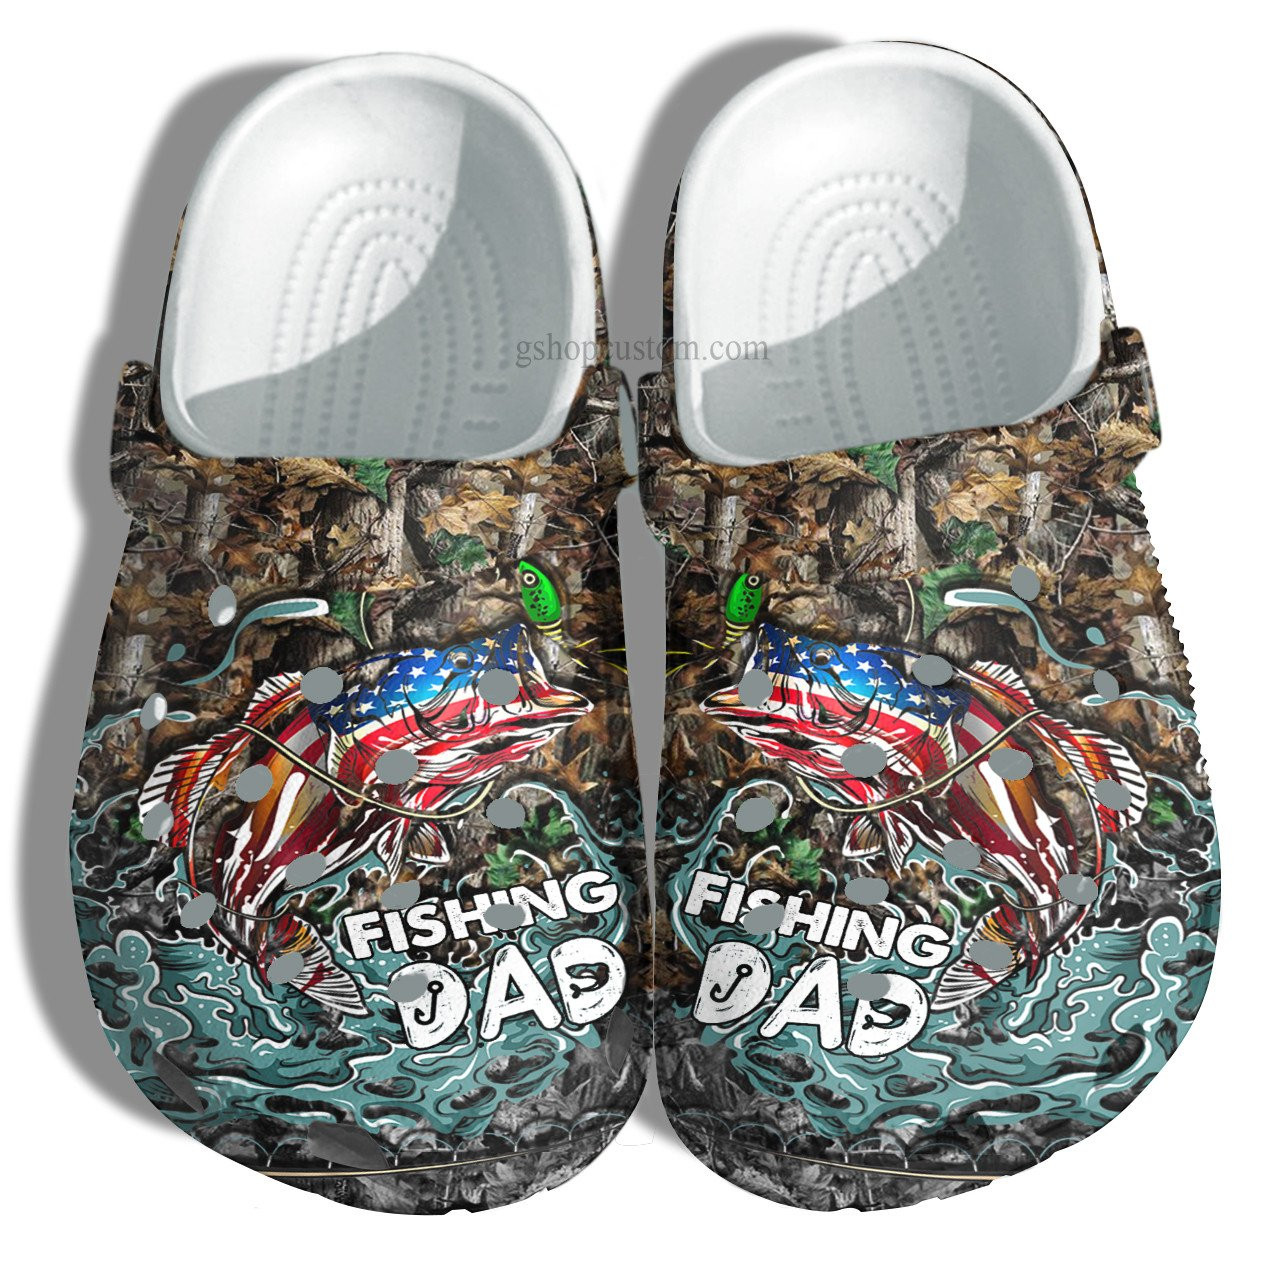 Fishing Dad Vintage Croc Shoes Gift Grandpa Father Day- Fishing Father Crocs Shoes Customize